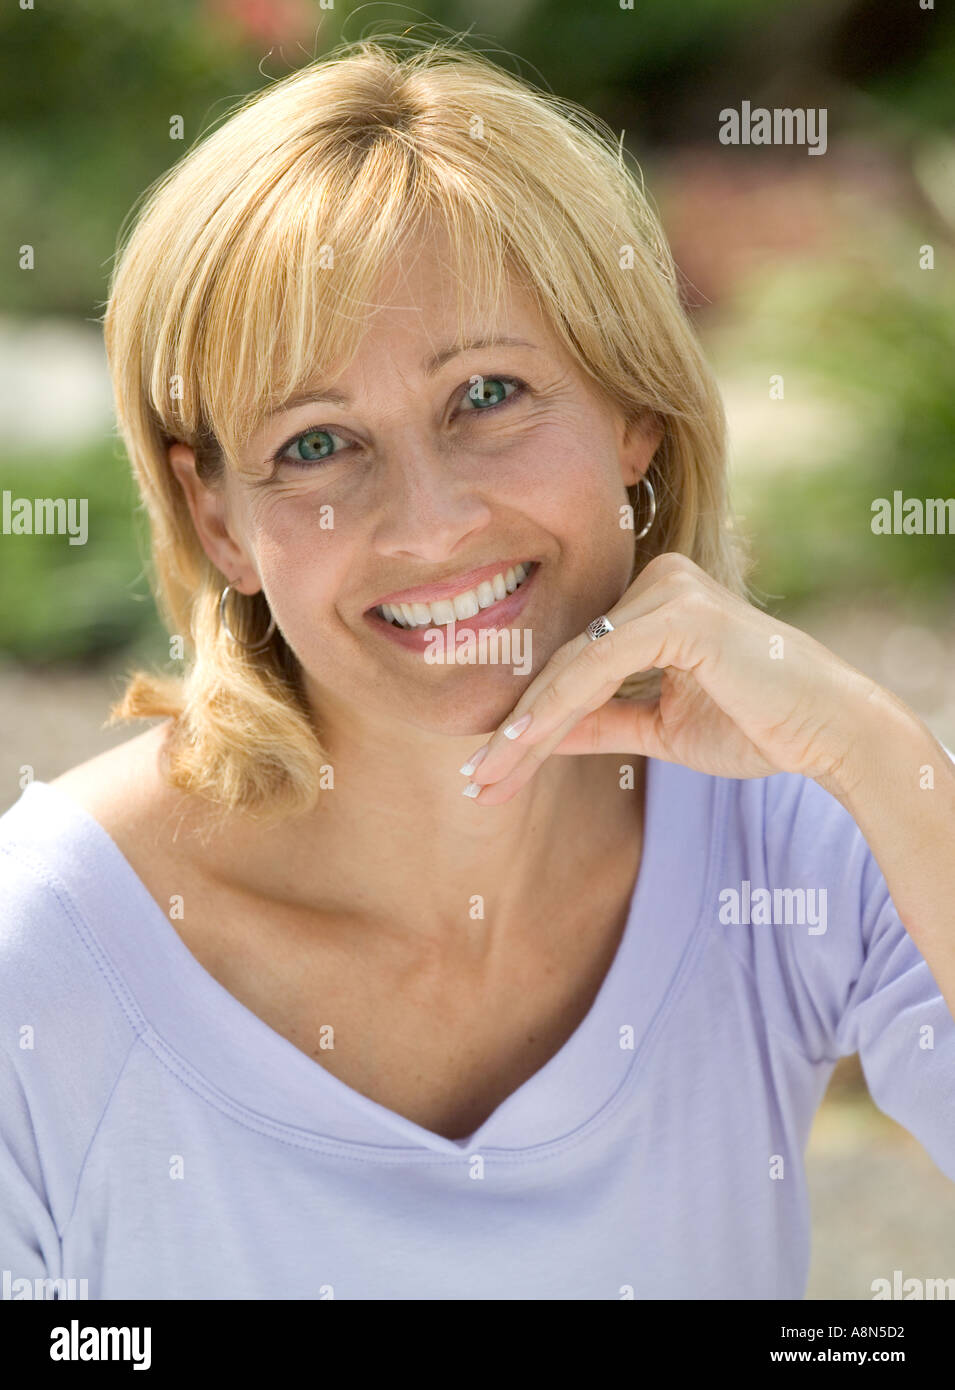 Informal portrait of a young woman Stock Photo